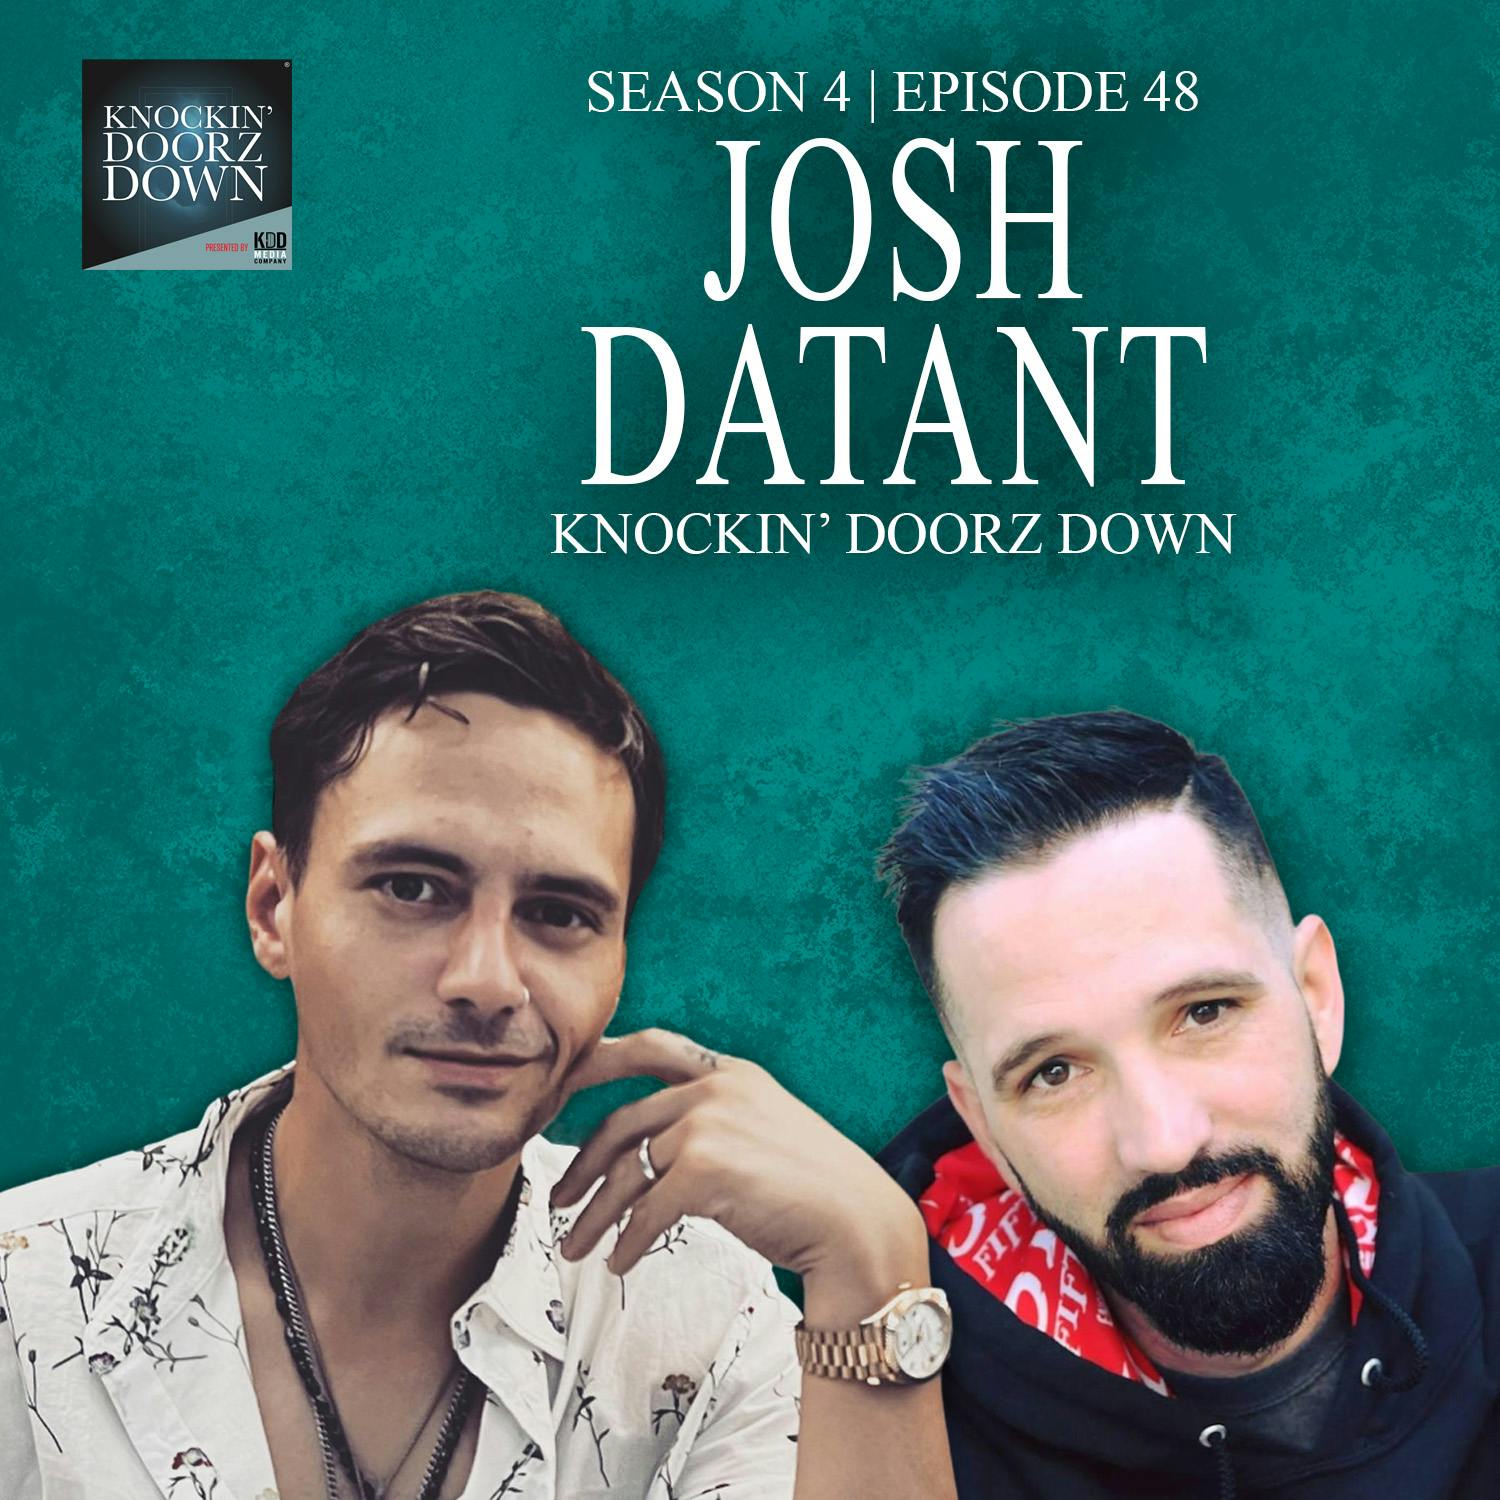 Josh Datant | The Love Of Music Over Addiction, Losing His Brother To An Overdose & Hope #recovery